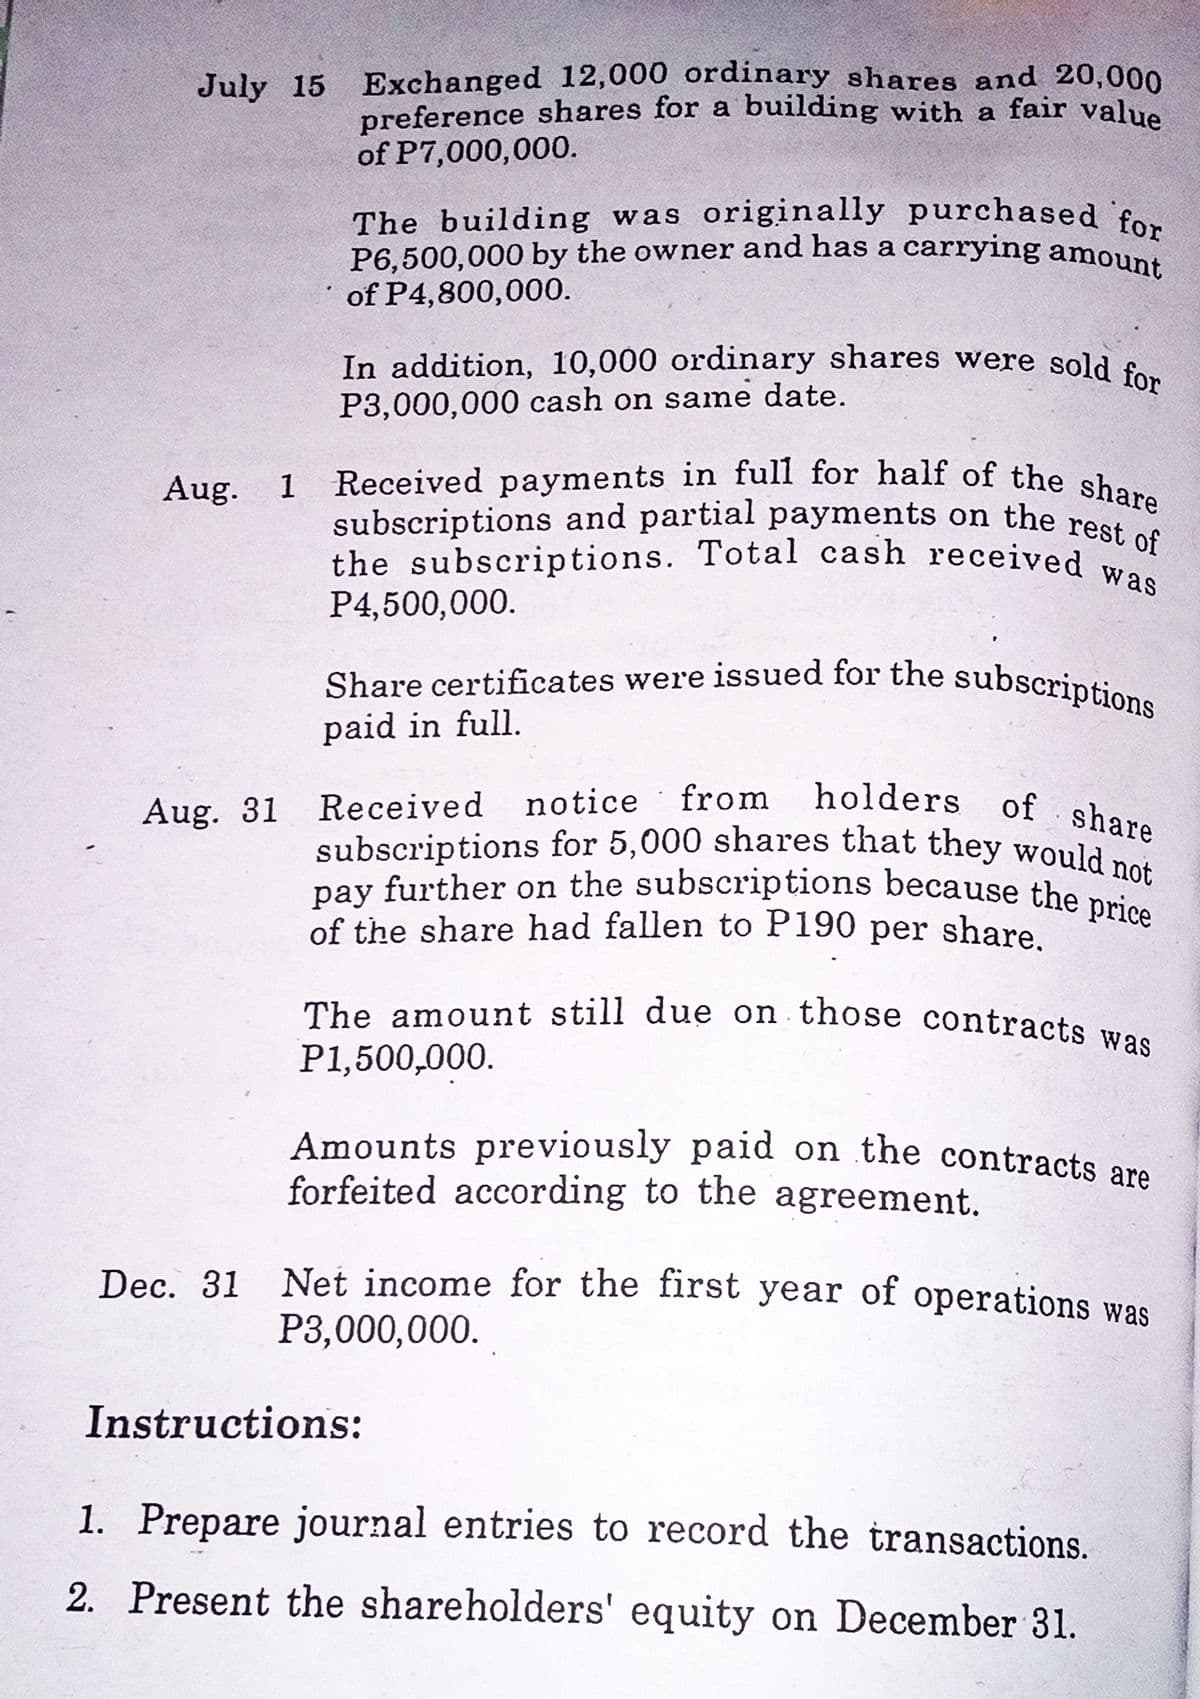 preference shares for a building with a fair value
The amount still due on those contracts was
notice from holders of share
subscriptions for 5,000 shares that they would not
P6,500,000 by the owner and has a carrying amount
Share certificates were issued for the subscriptions
pay further on the subscriptions because the price
The building was originally purchased for
In addition, 10,000 ordinary shares were sold for
subscriptions and partial payments on the rest of
the subscriptions. Total cash received was
1 Received payments in full for half of the share
July 15 Exchanged 12,000 ordinary shares and 20,000
of P7,000,000.
The building was originally purchased fo
* of P4,800,000.
In addition, 10,000 ordinary shares were sold s.
P3,000,000 cash on same date.
Aug. 1
subscriptions and partial payments on the rest
the subscriptions. Total cash received
P4,500,000.
Share certificates were issued for the subscription
paid in full.
from
holders of share
Aug. 31 Received notice
of the share had fallen to P190 per share.
P1,500,000.
Amounts previously paid on the contracts are
forfeited according to the agreement.
Dec. 31 Net income for the first year of operations was
P3,000,000.
Instructions:
1. Prepare journal entries to record the transactions.
2. Present the shareholders' equity on December 31.
